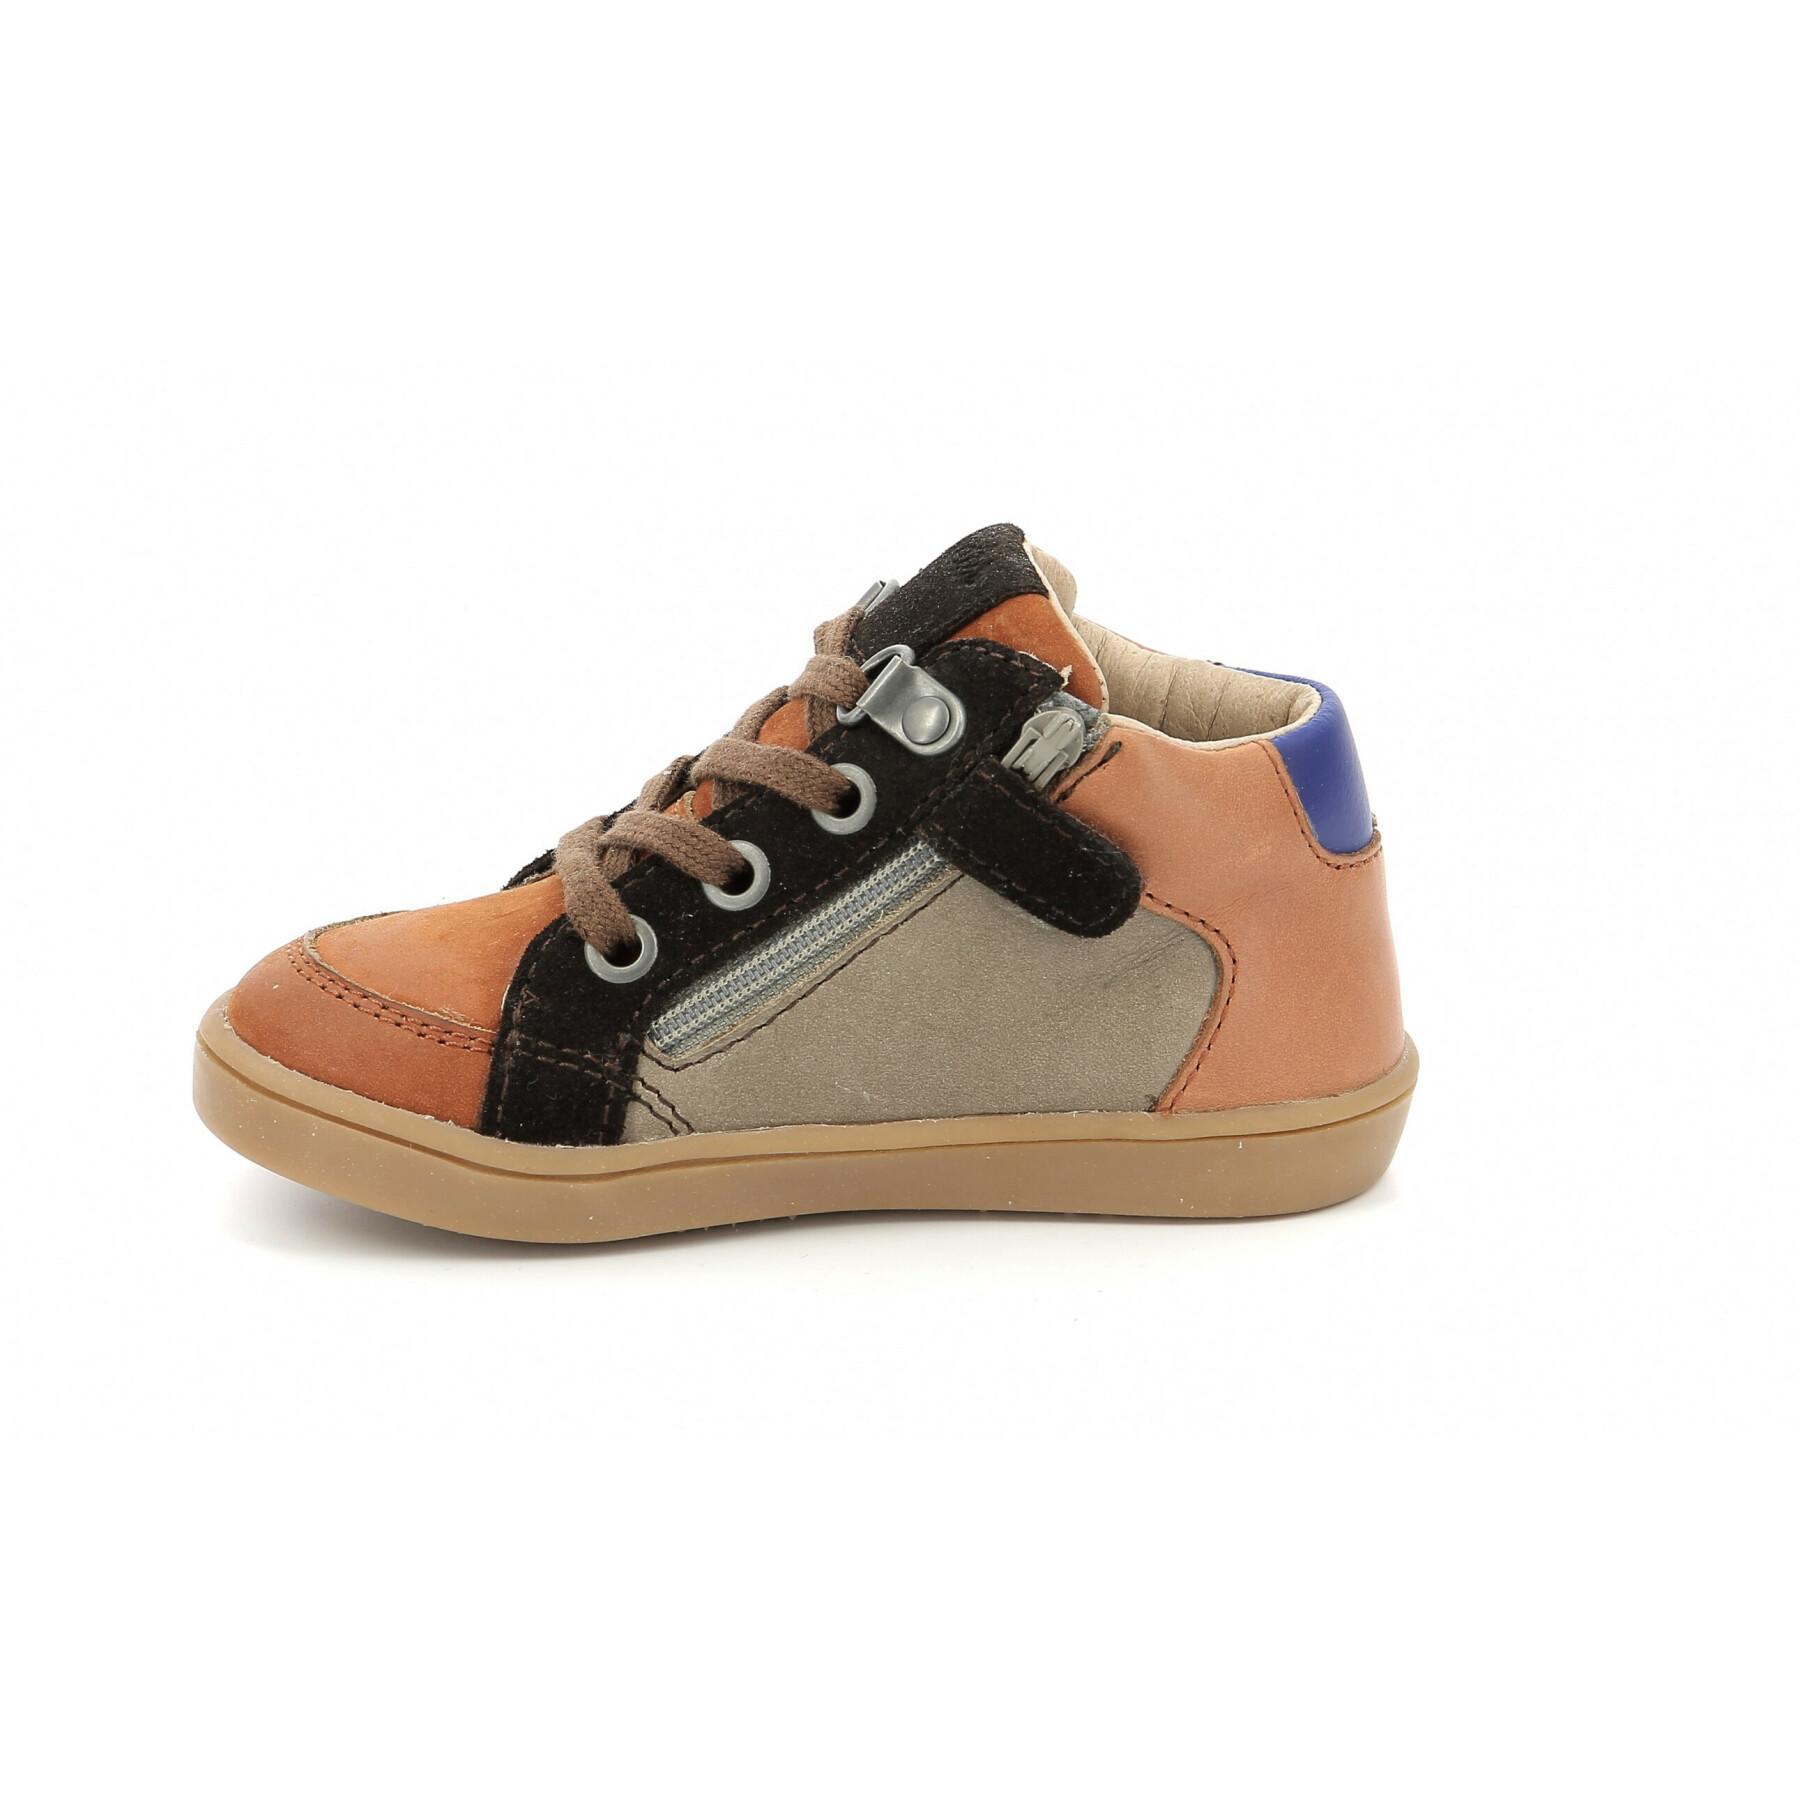 Baby boy sneakers Aster Woucity